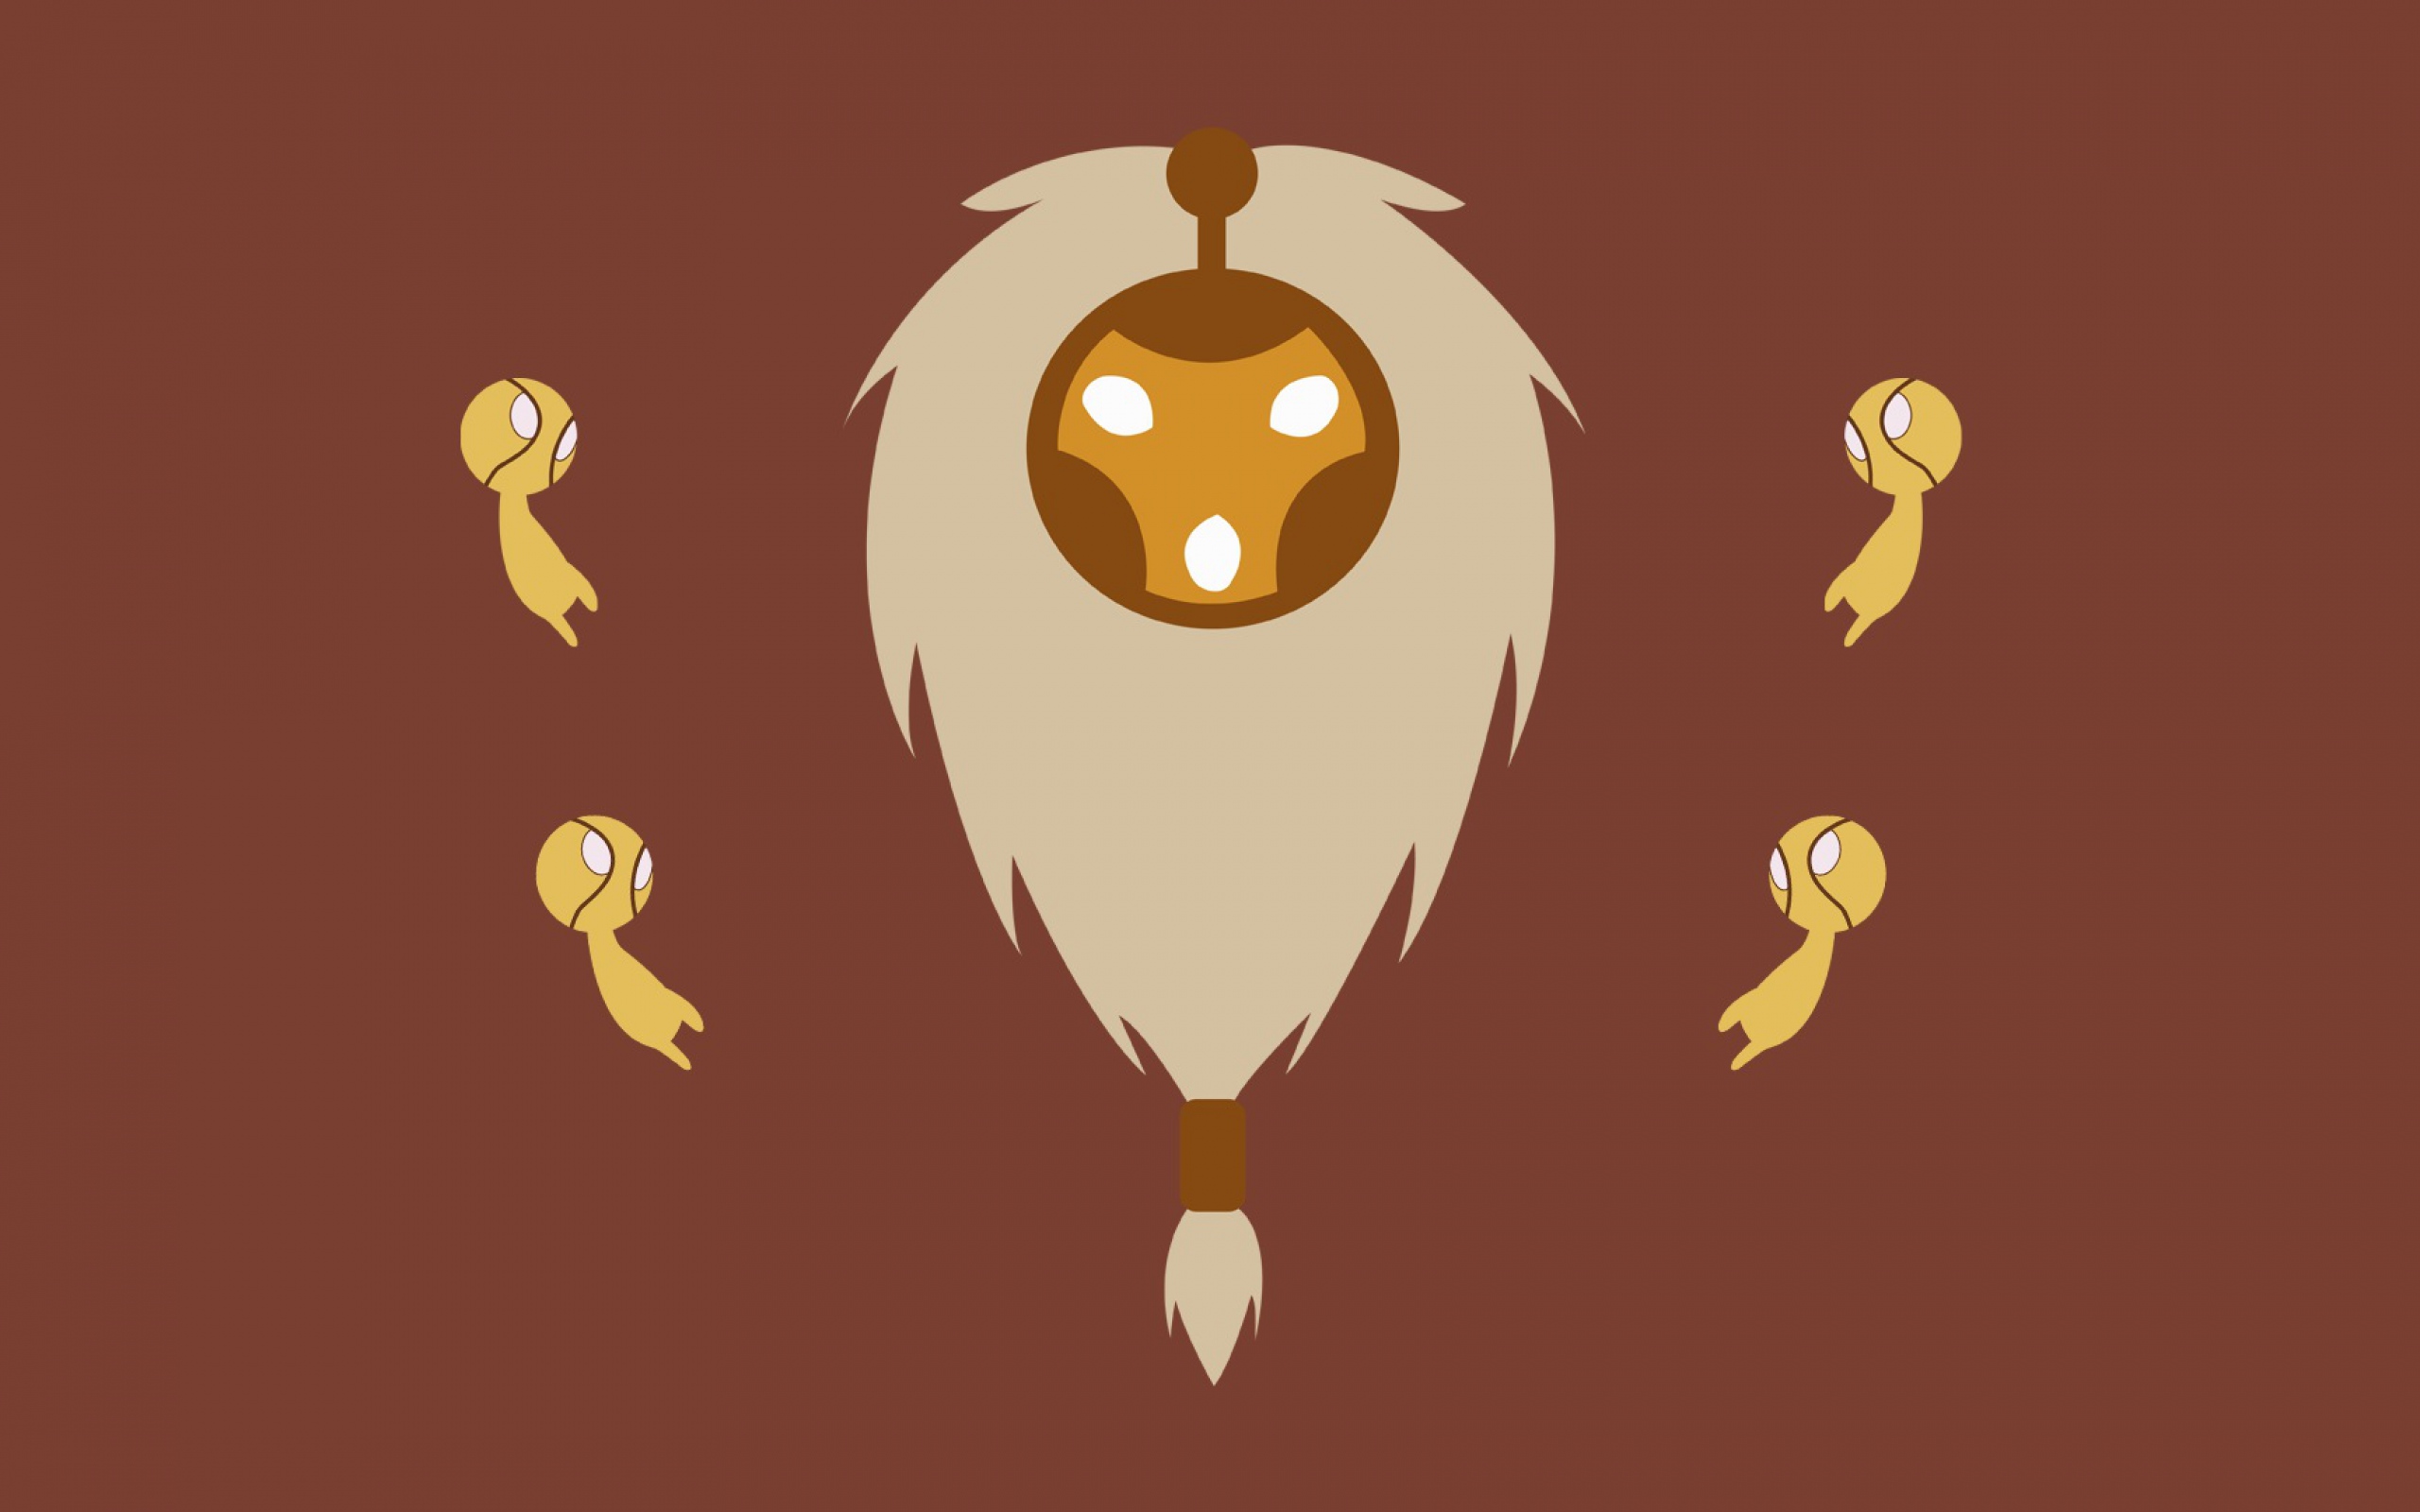 HD Background League Of Legends Game Minimalism Brown Wallpaper